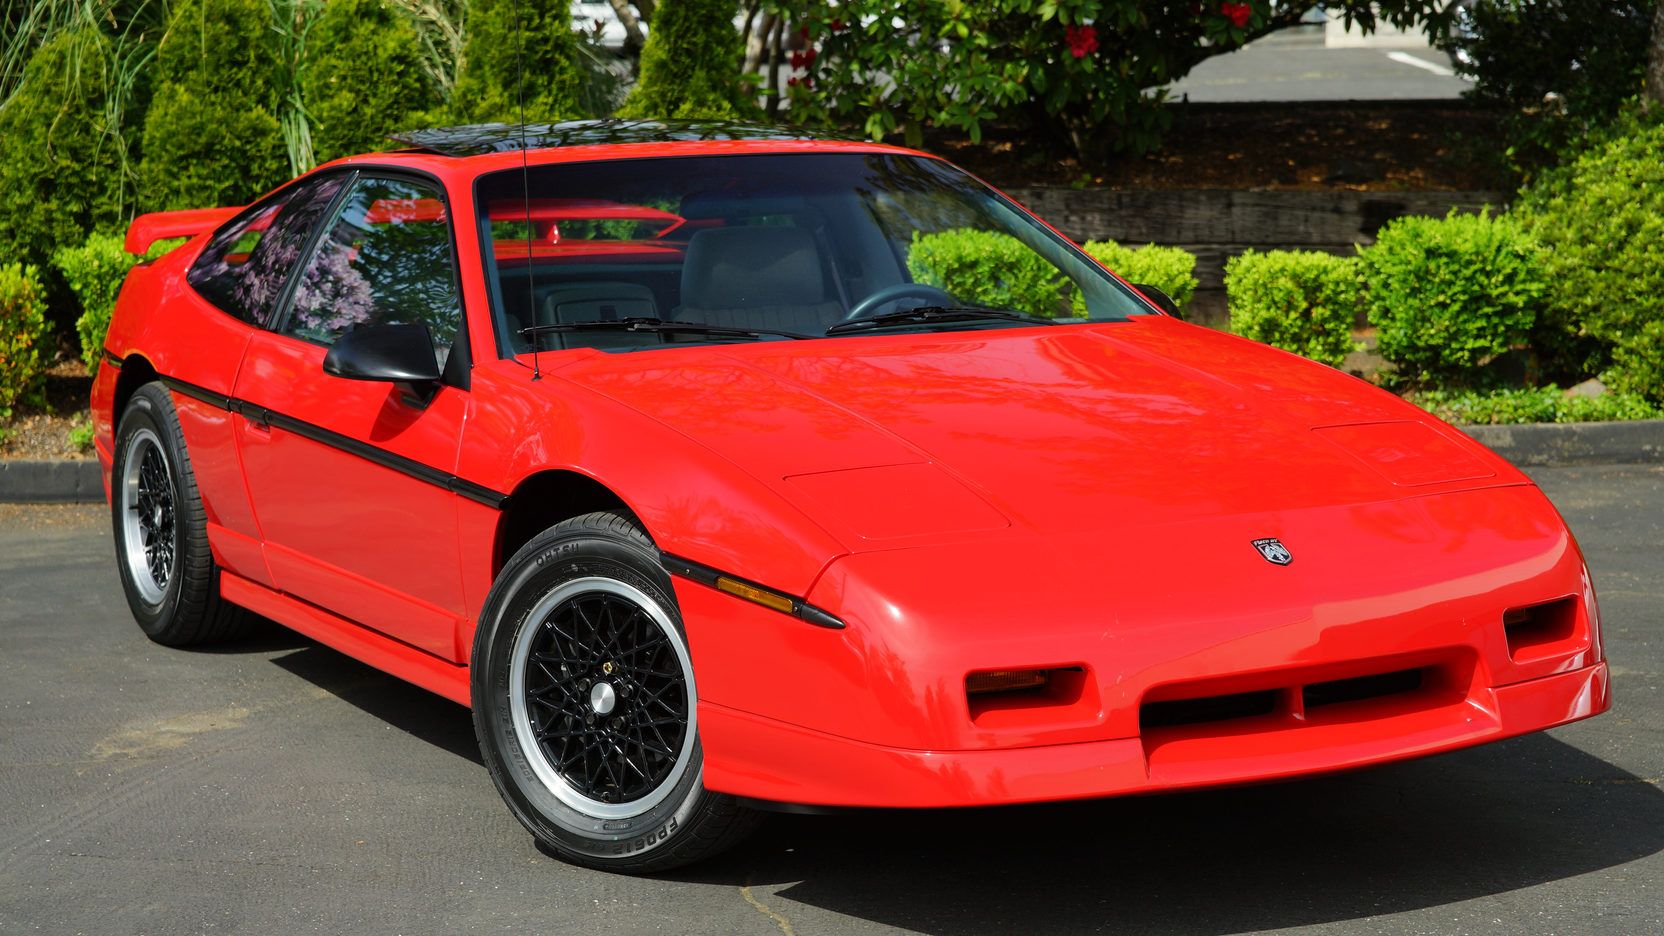 The Fiero was the first mass produced mid engined sports car from the US.